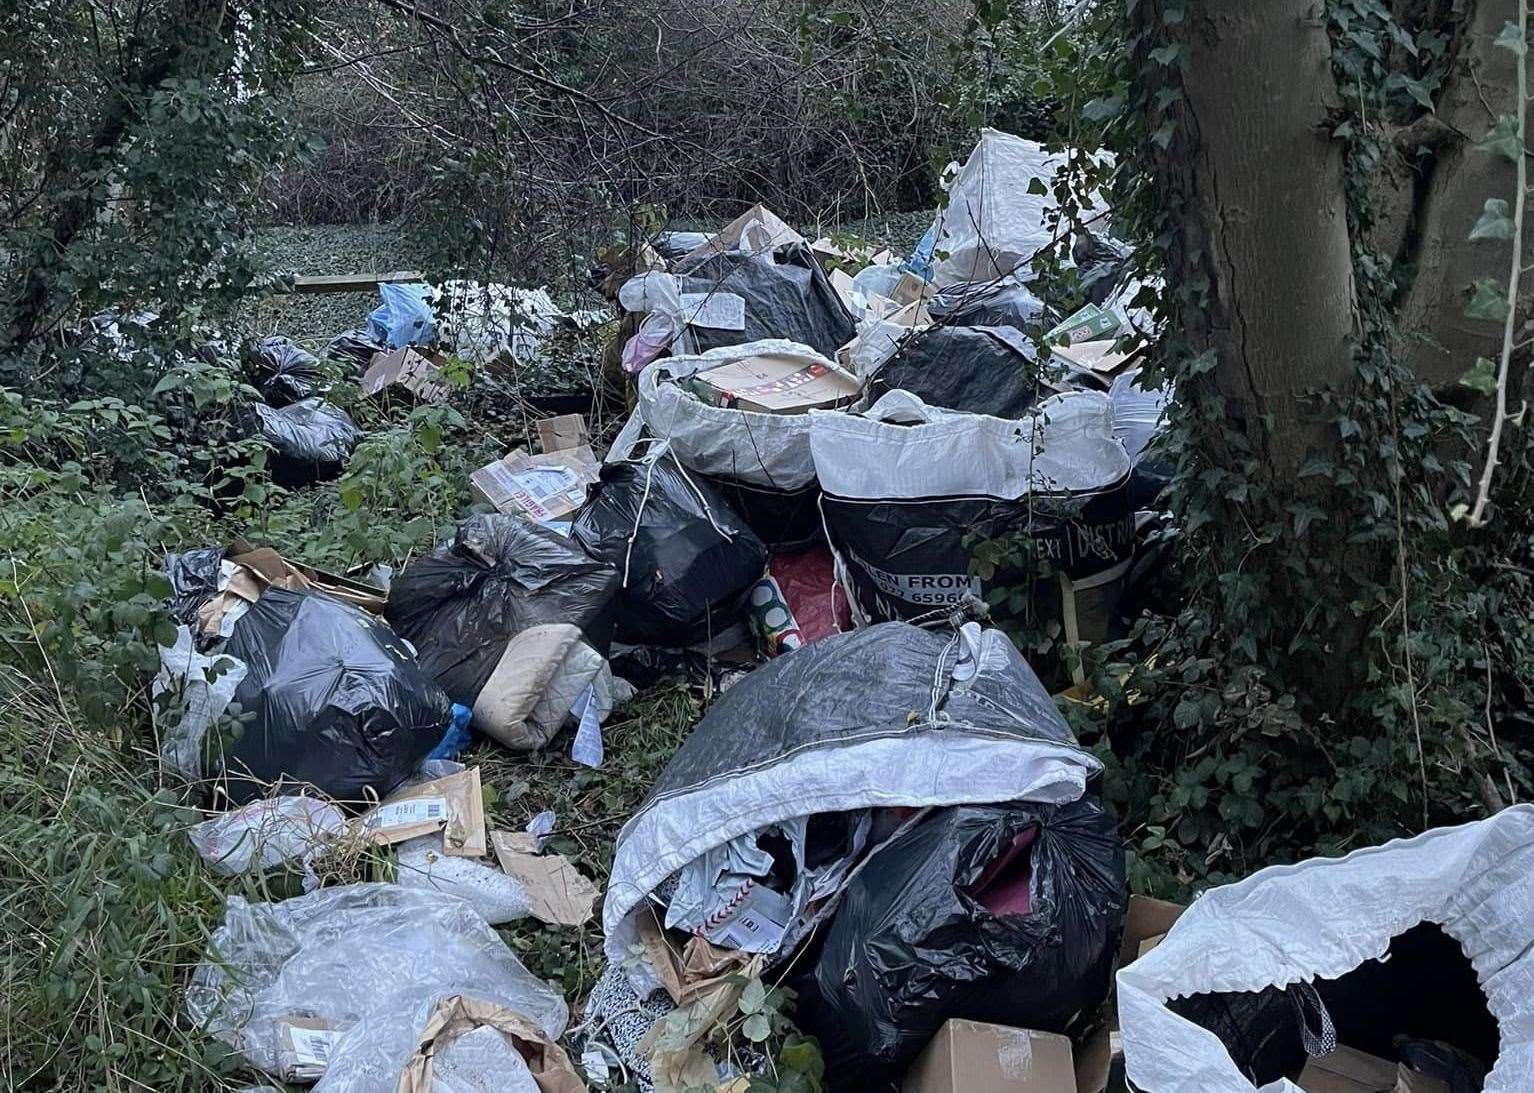 An investigation has been launched after several Hermes/Evri parcels were found dumped at the end of Beacon Lane, Chatham. Photo: Wayne Coveney